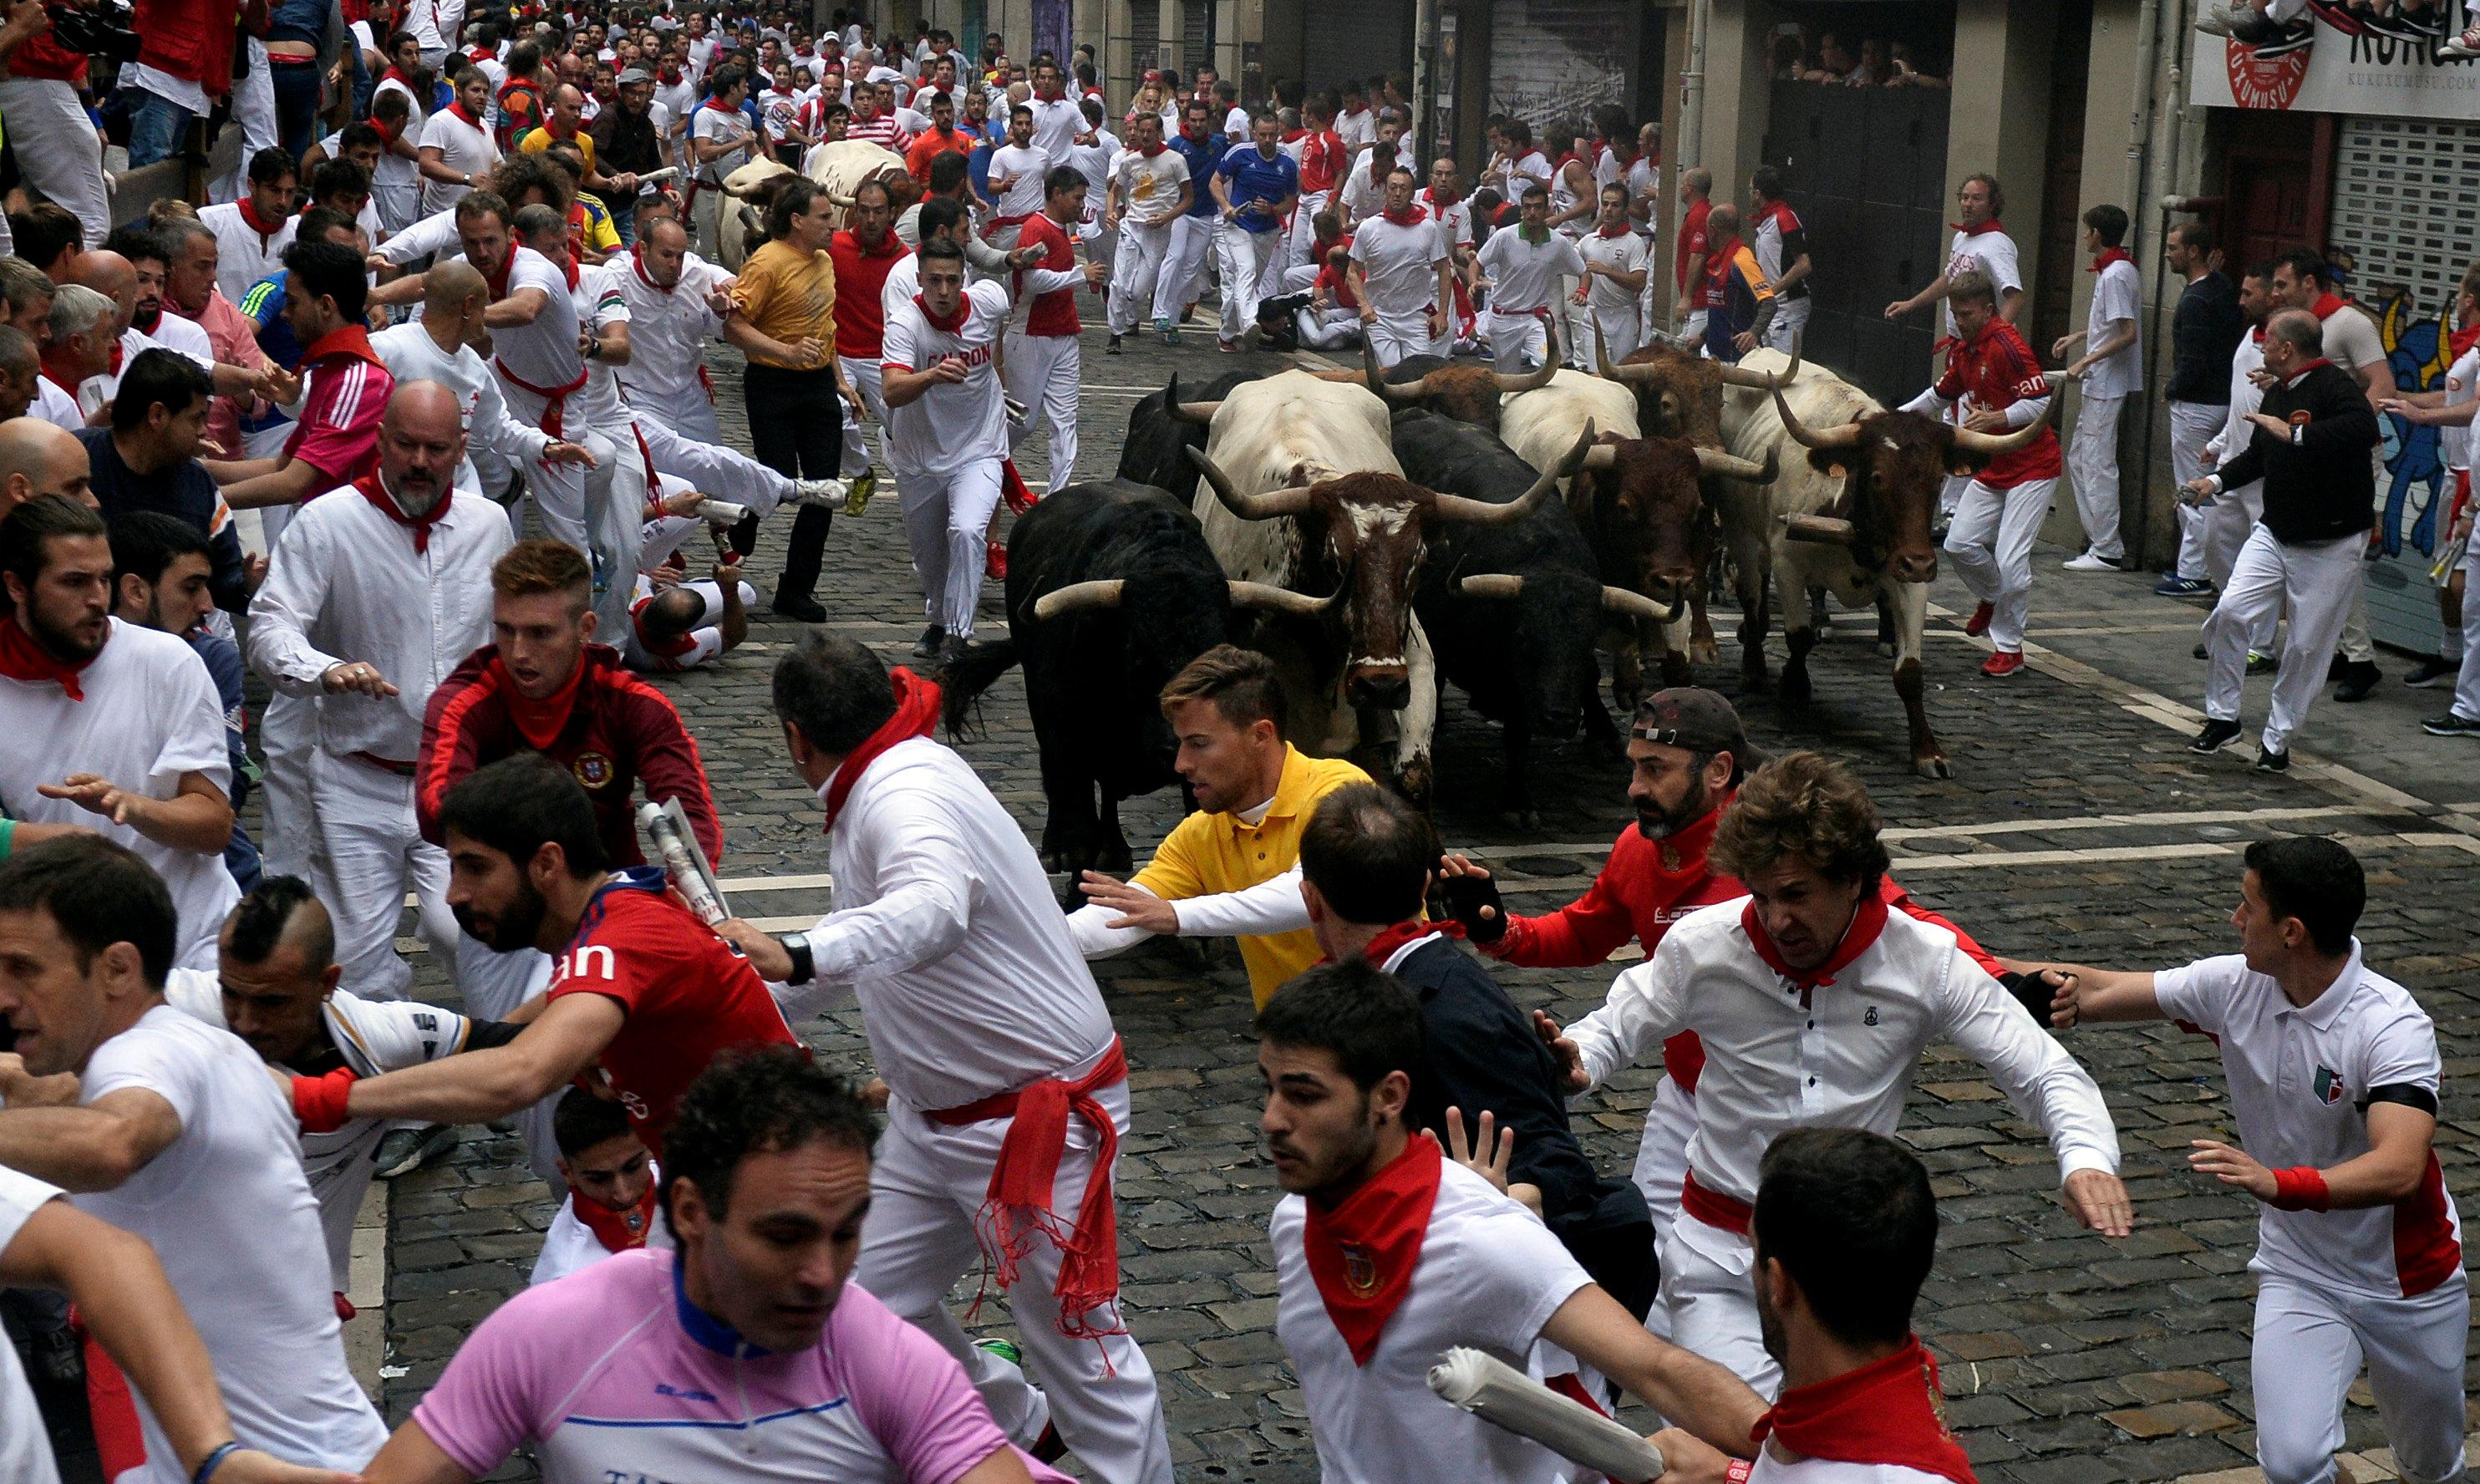 Runners sprint ahead of Fuente Ymbro fighting bulls. Vincent West / Reuters